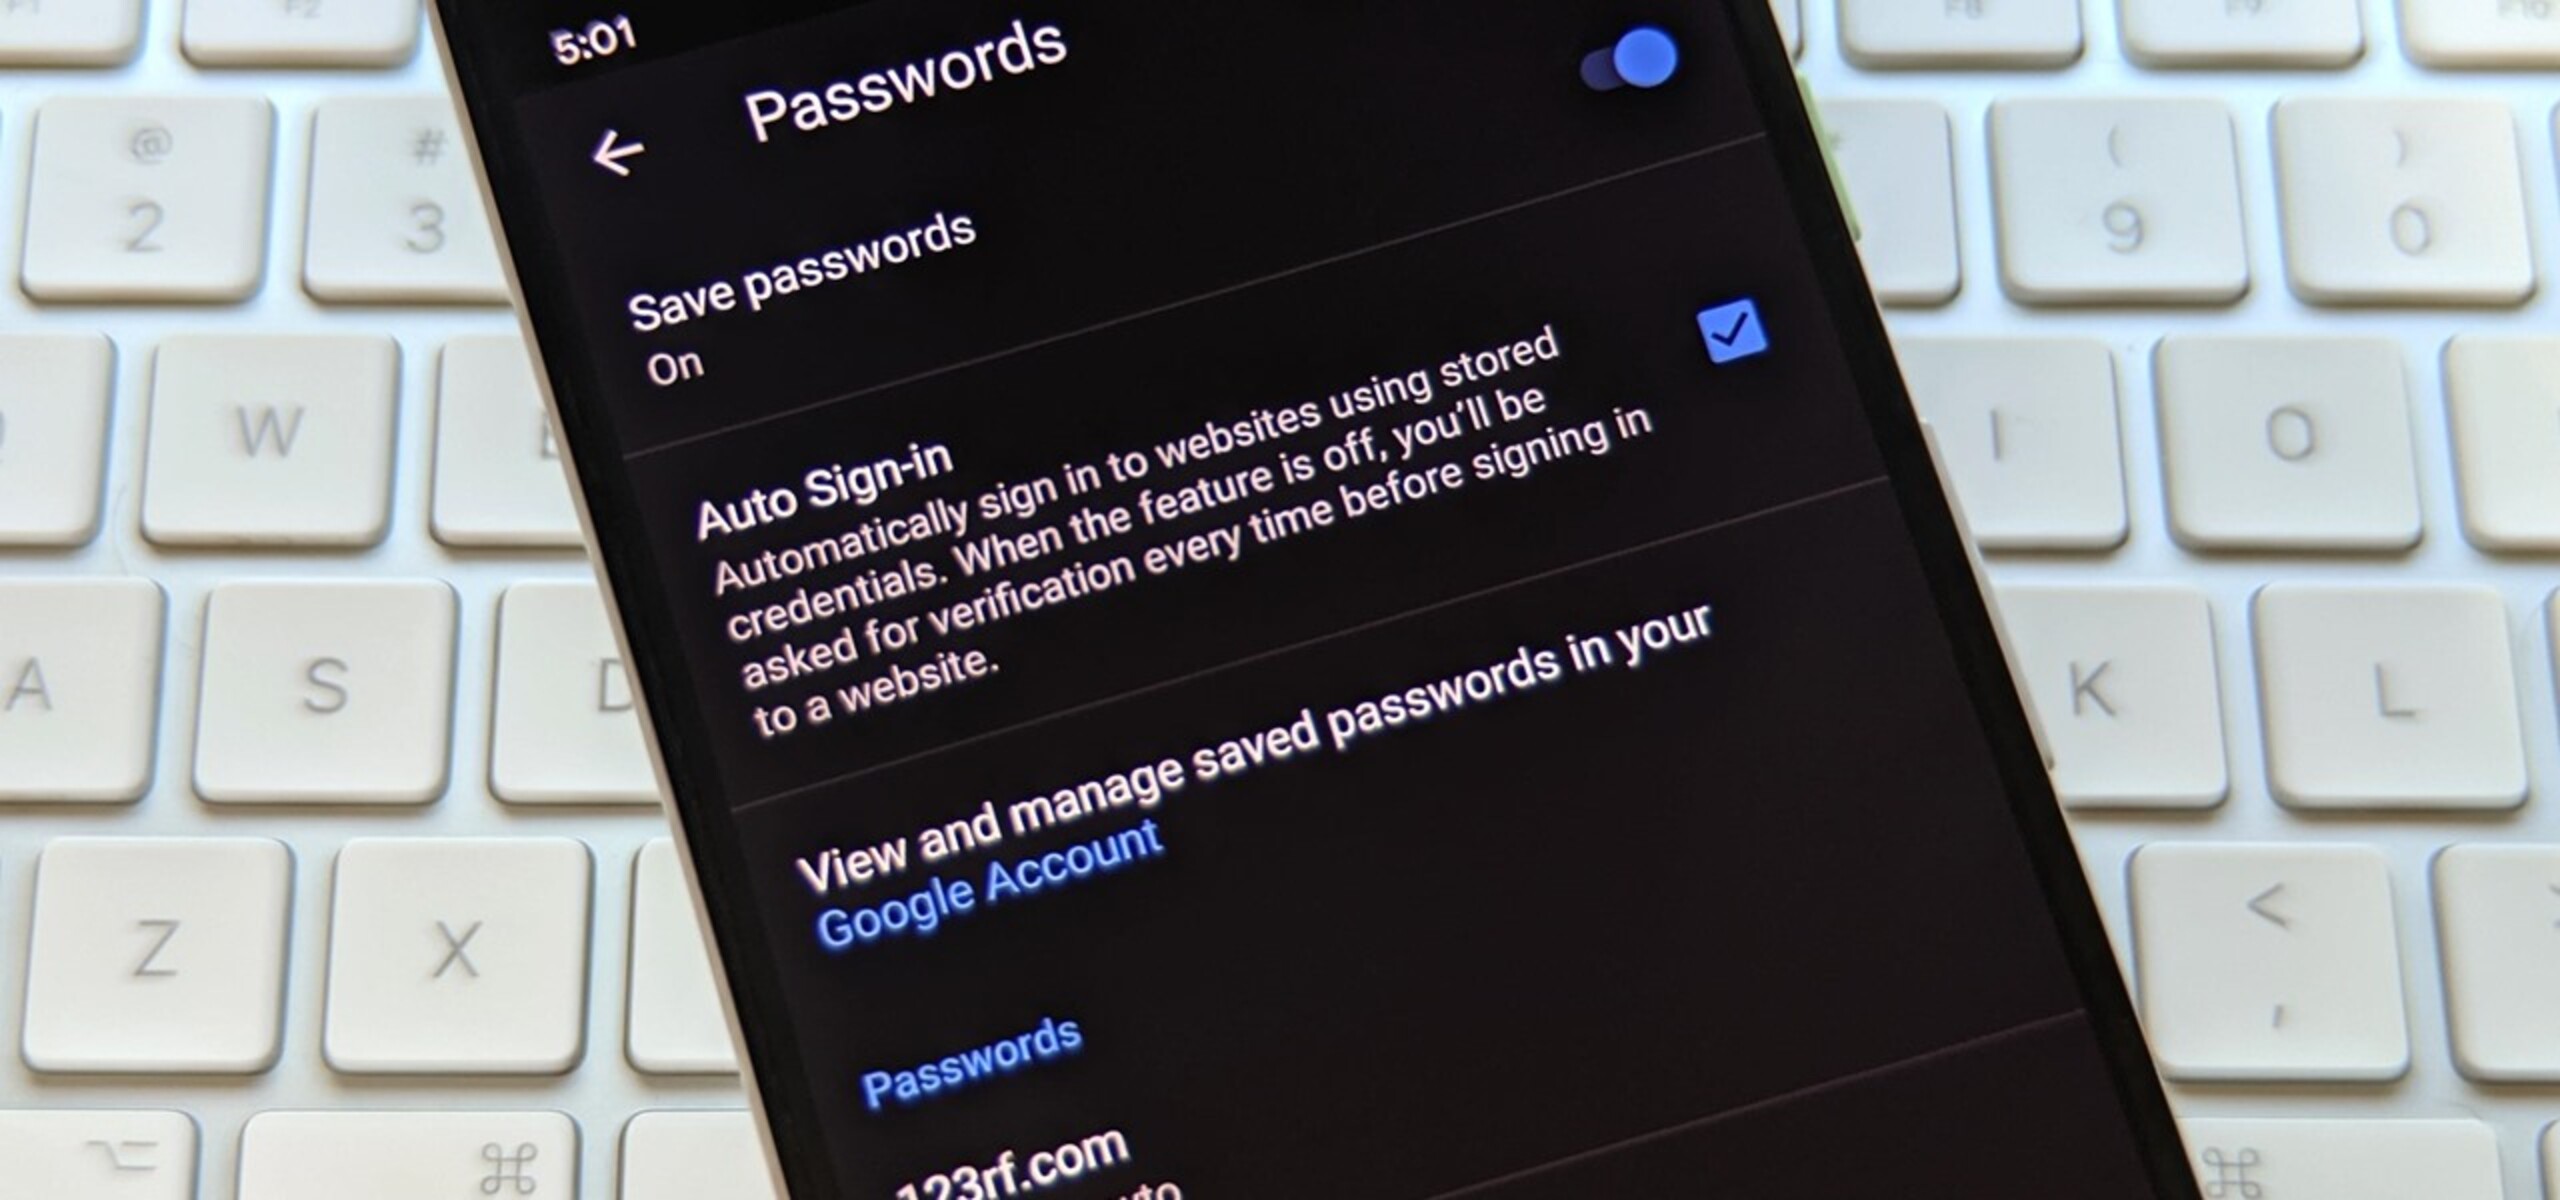 How To Change Remembered Passwords On Chrome